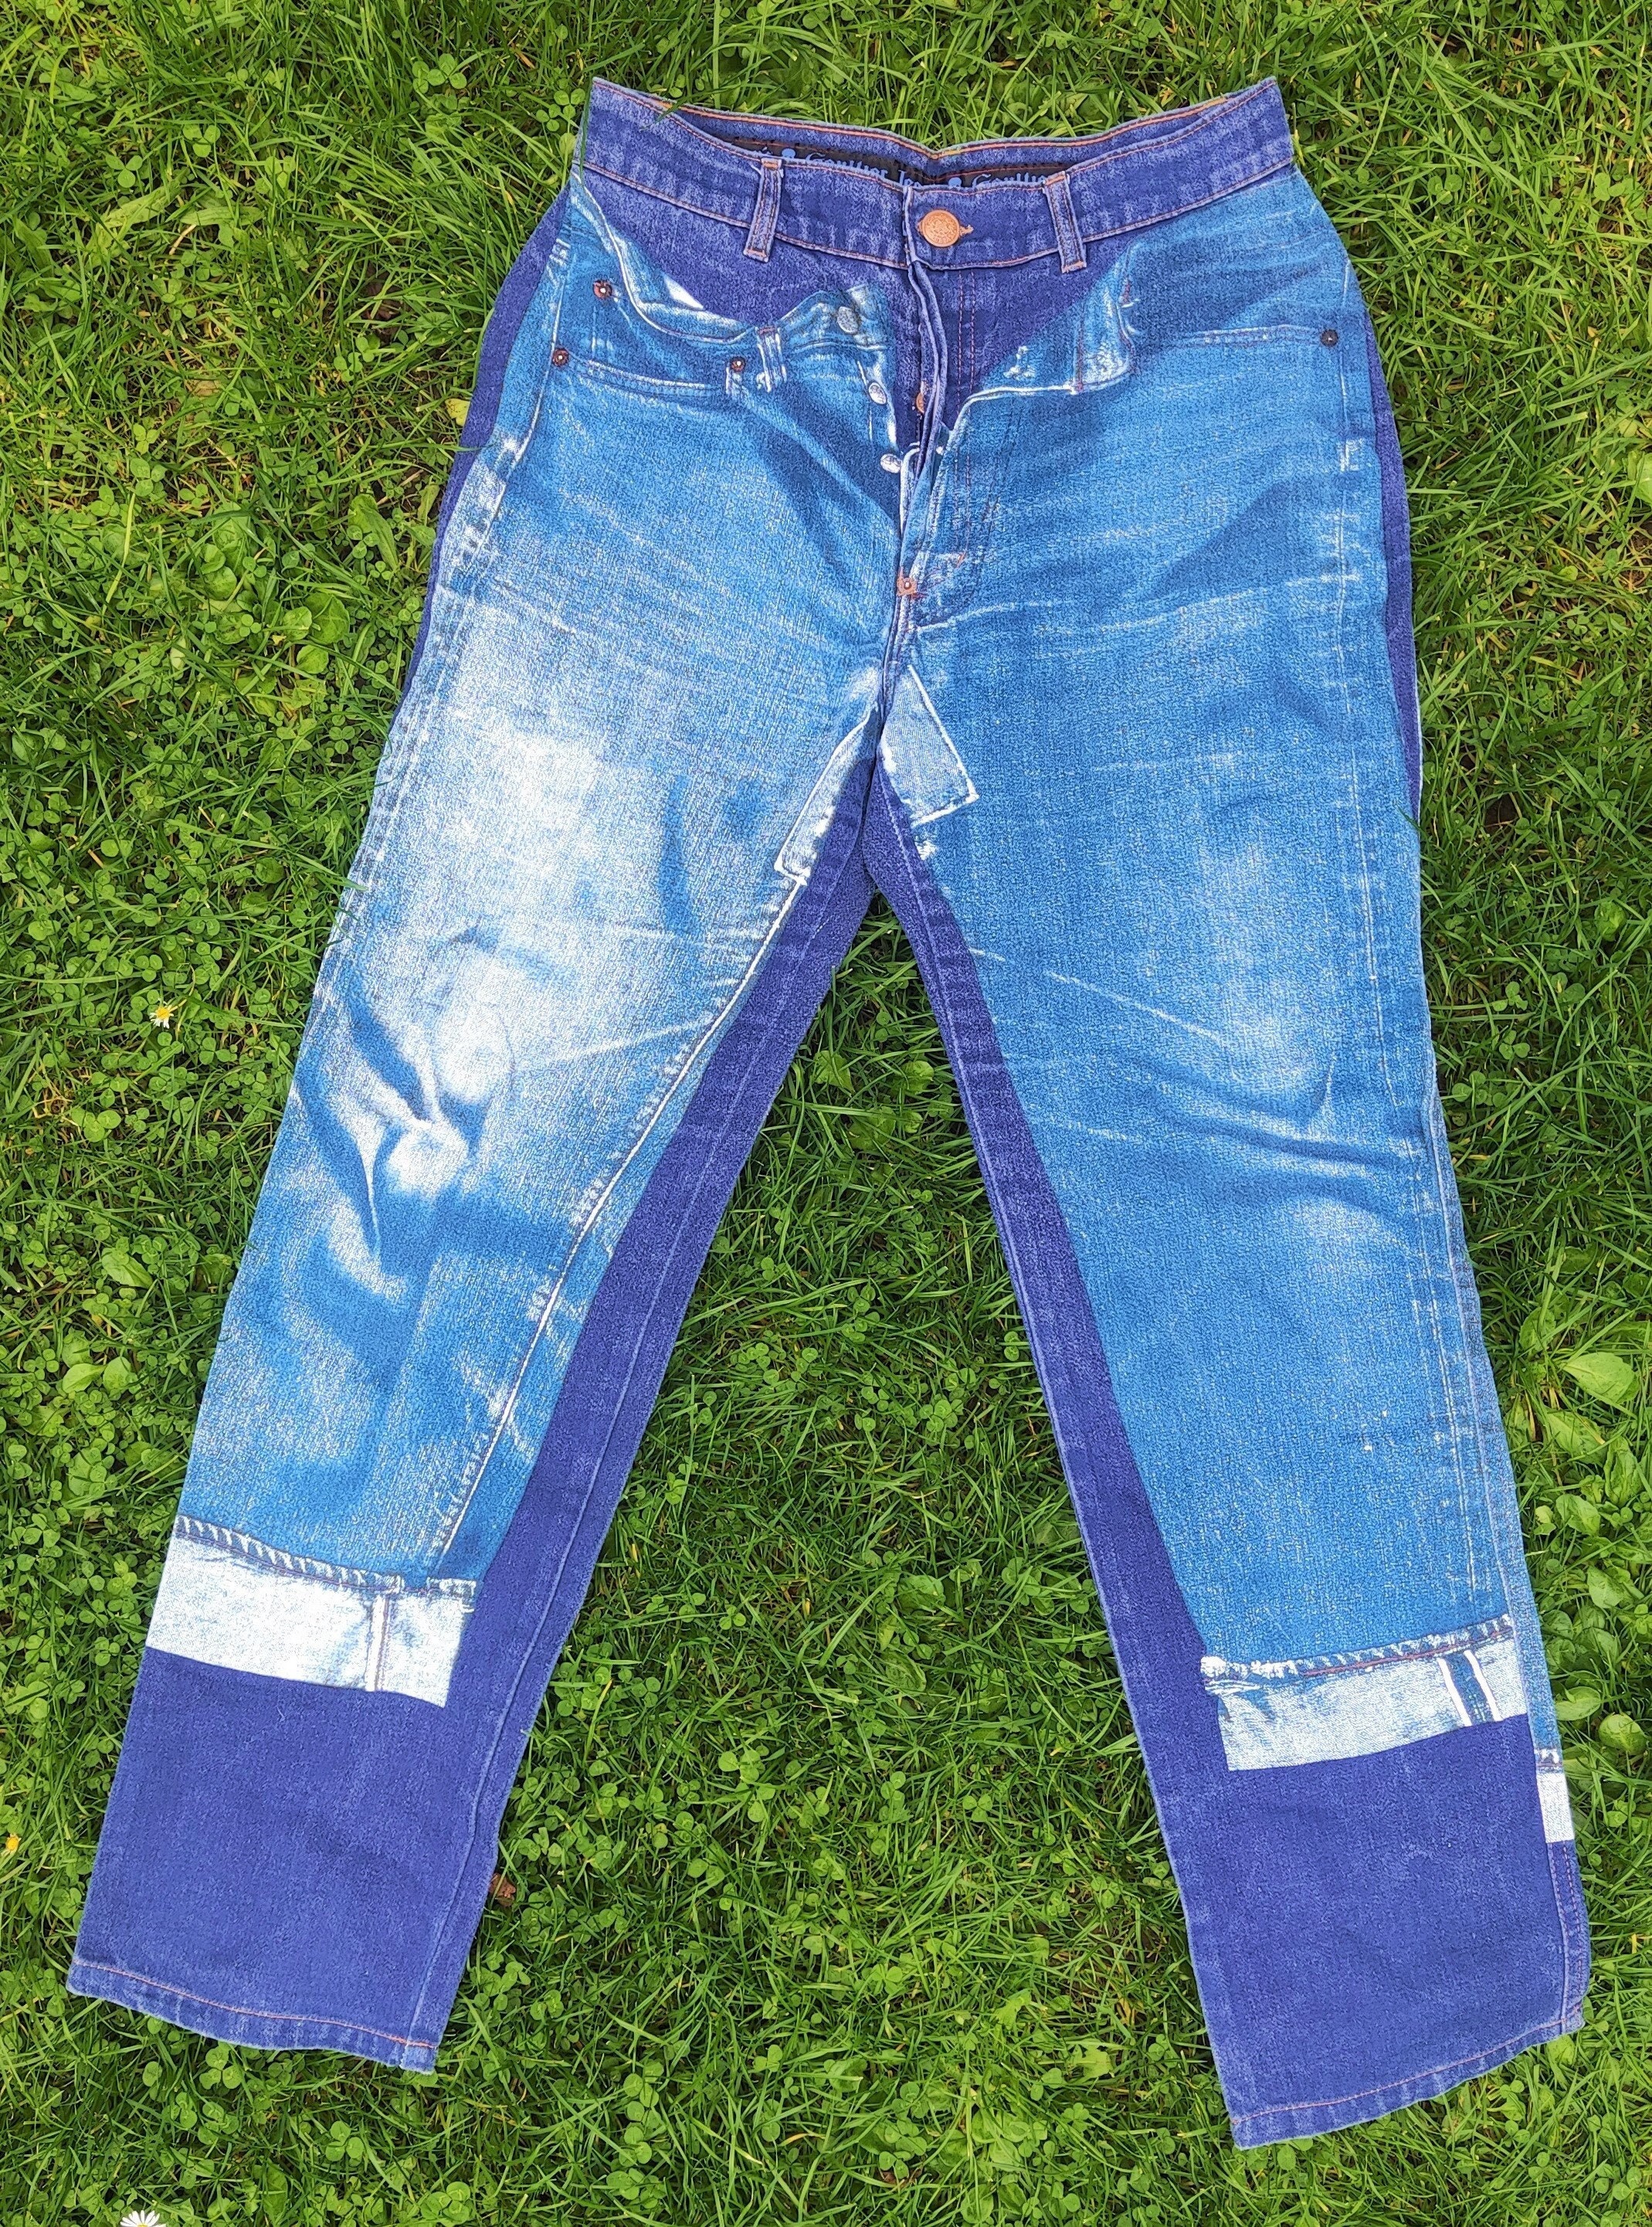 Gaultier Jeans - Etsy